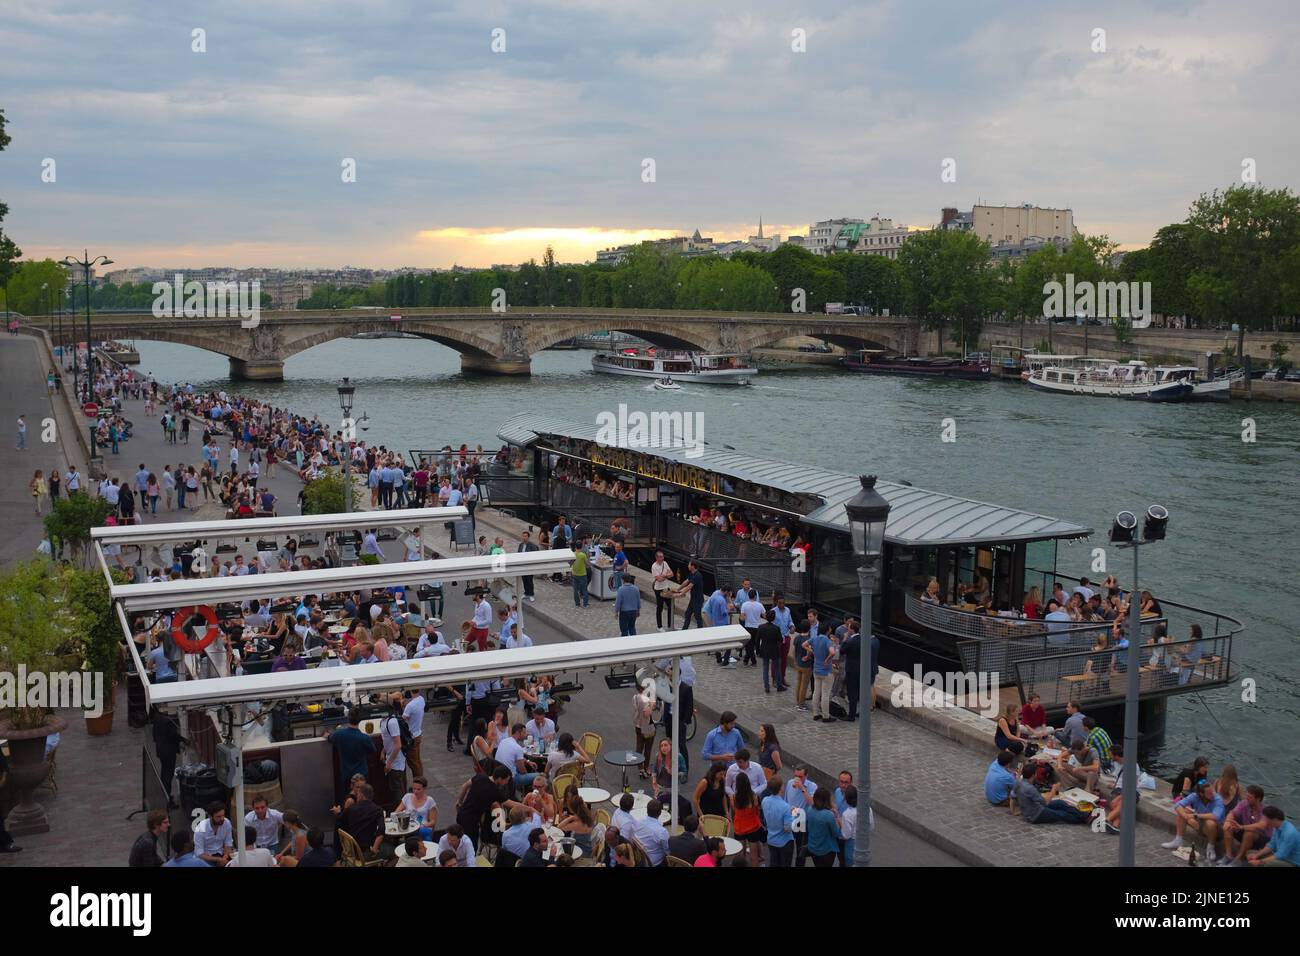 Huge crowd of people hang out with food and drinks by the Seine river, near Pont de la Concorde. Beautiful summer day outdoor in Paris, France. Stock Photo